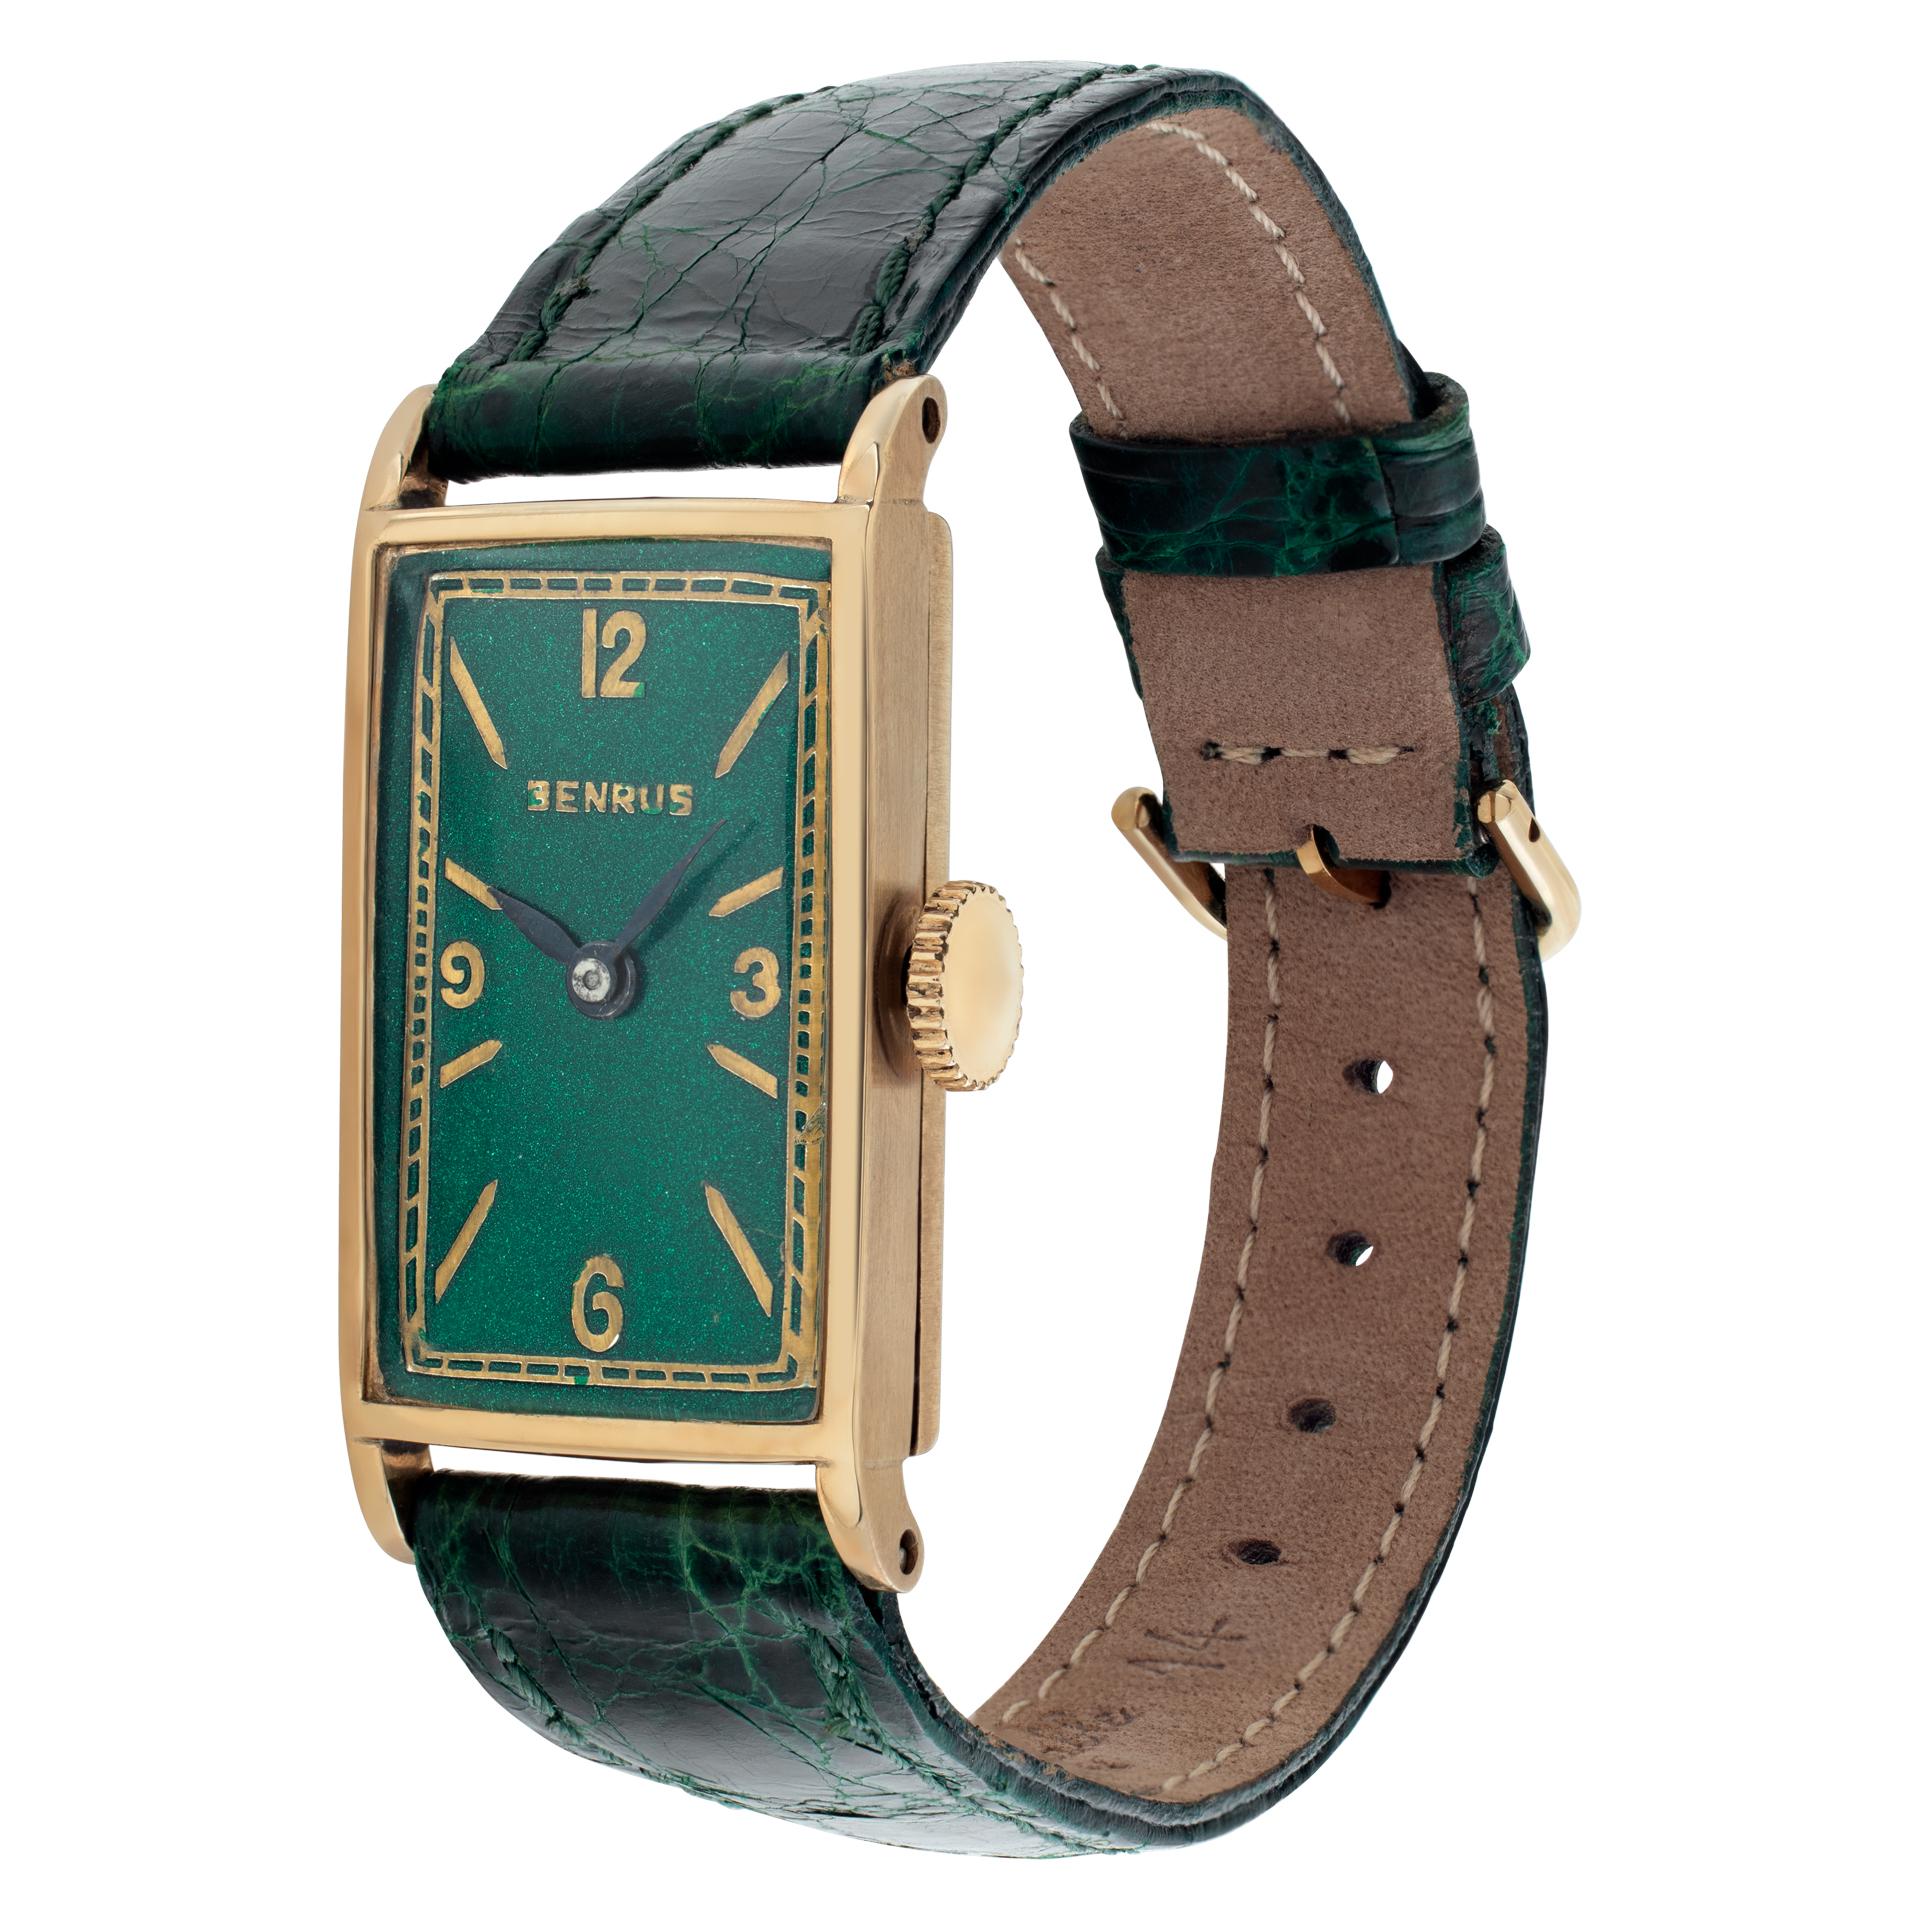 Vintage Ladies Benrus manual wind leather band with two piece clasp. Certified pre-owned. Manual Fine Pre-owned Benrus Watch. Certified preowned Vintage Benrus Classic watch on a Green Leather band with a Gold Fill tang buckle. This Benrus watch has